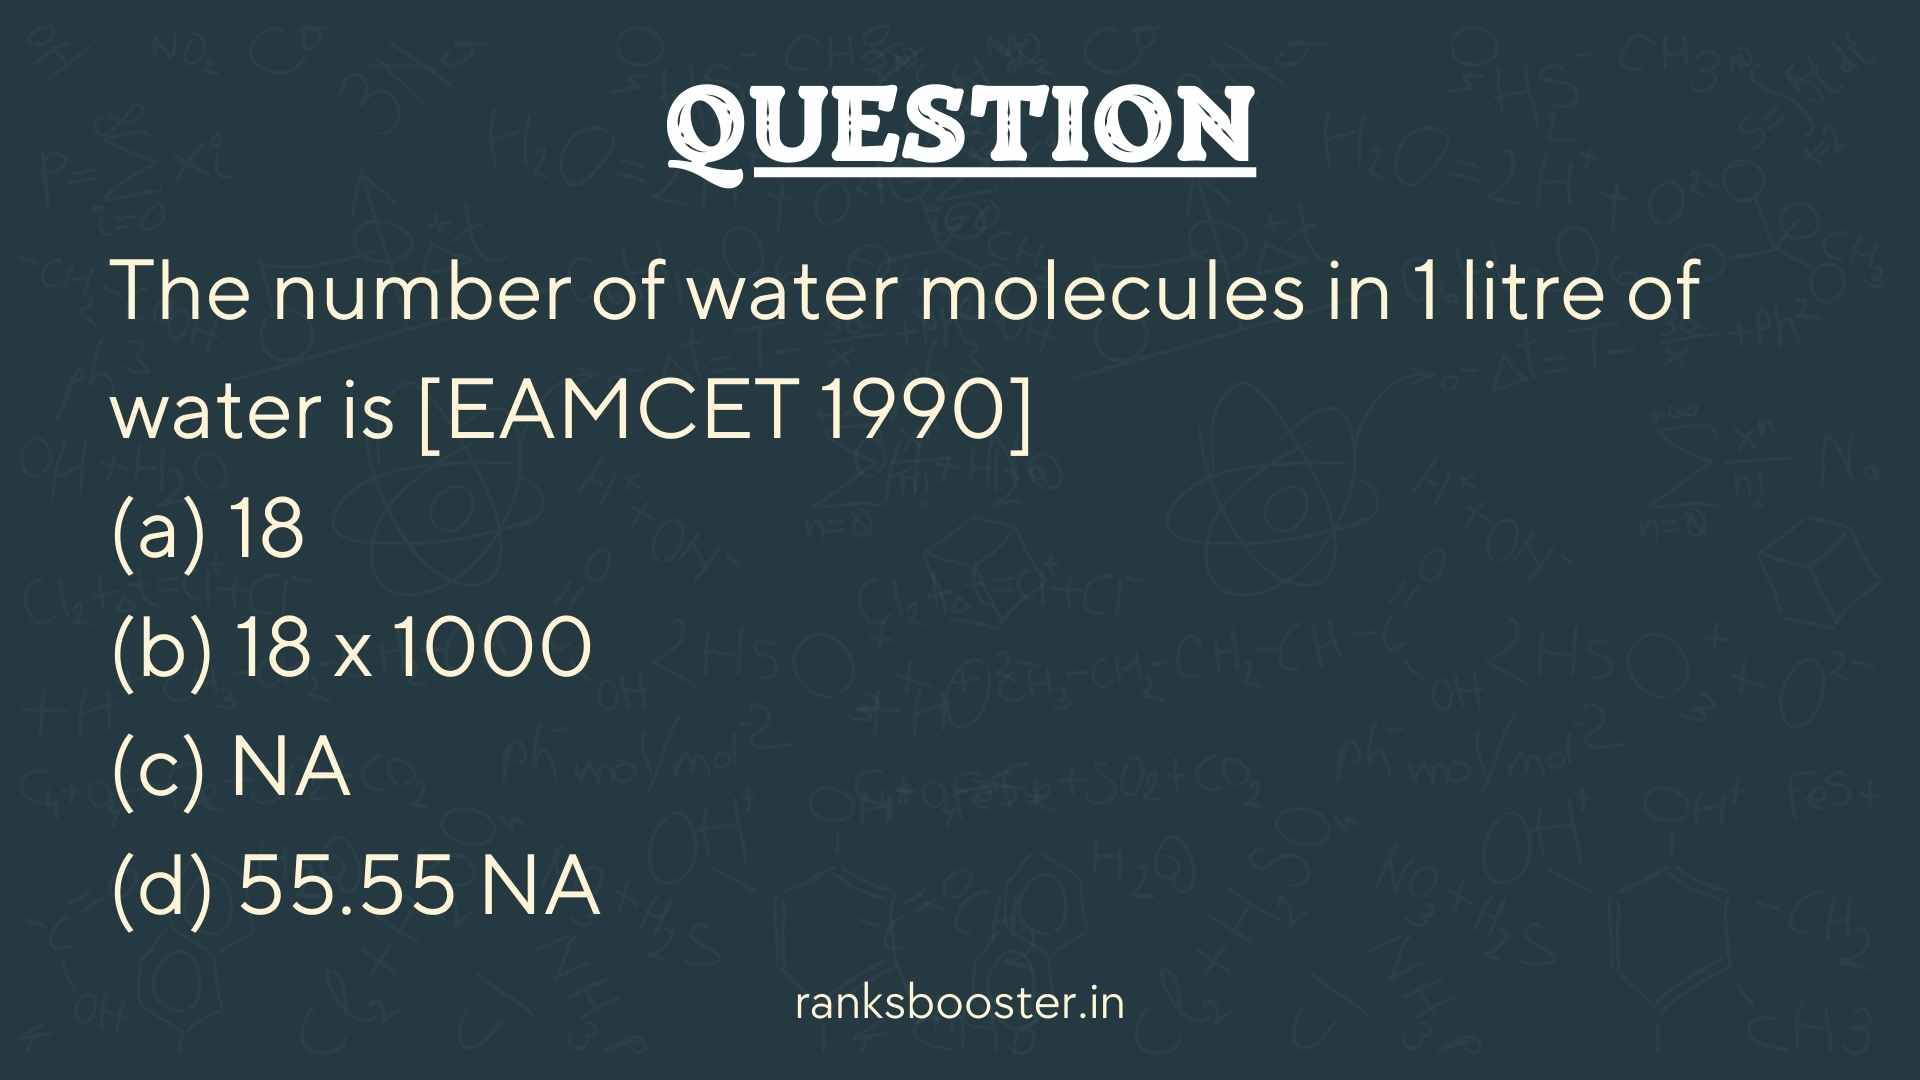 The number of water molecules in 1 litre of water is [EAMCET 1990] (a) 18 (b) 18 x 1000 (c) NA (d) 55.55 NA